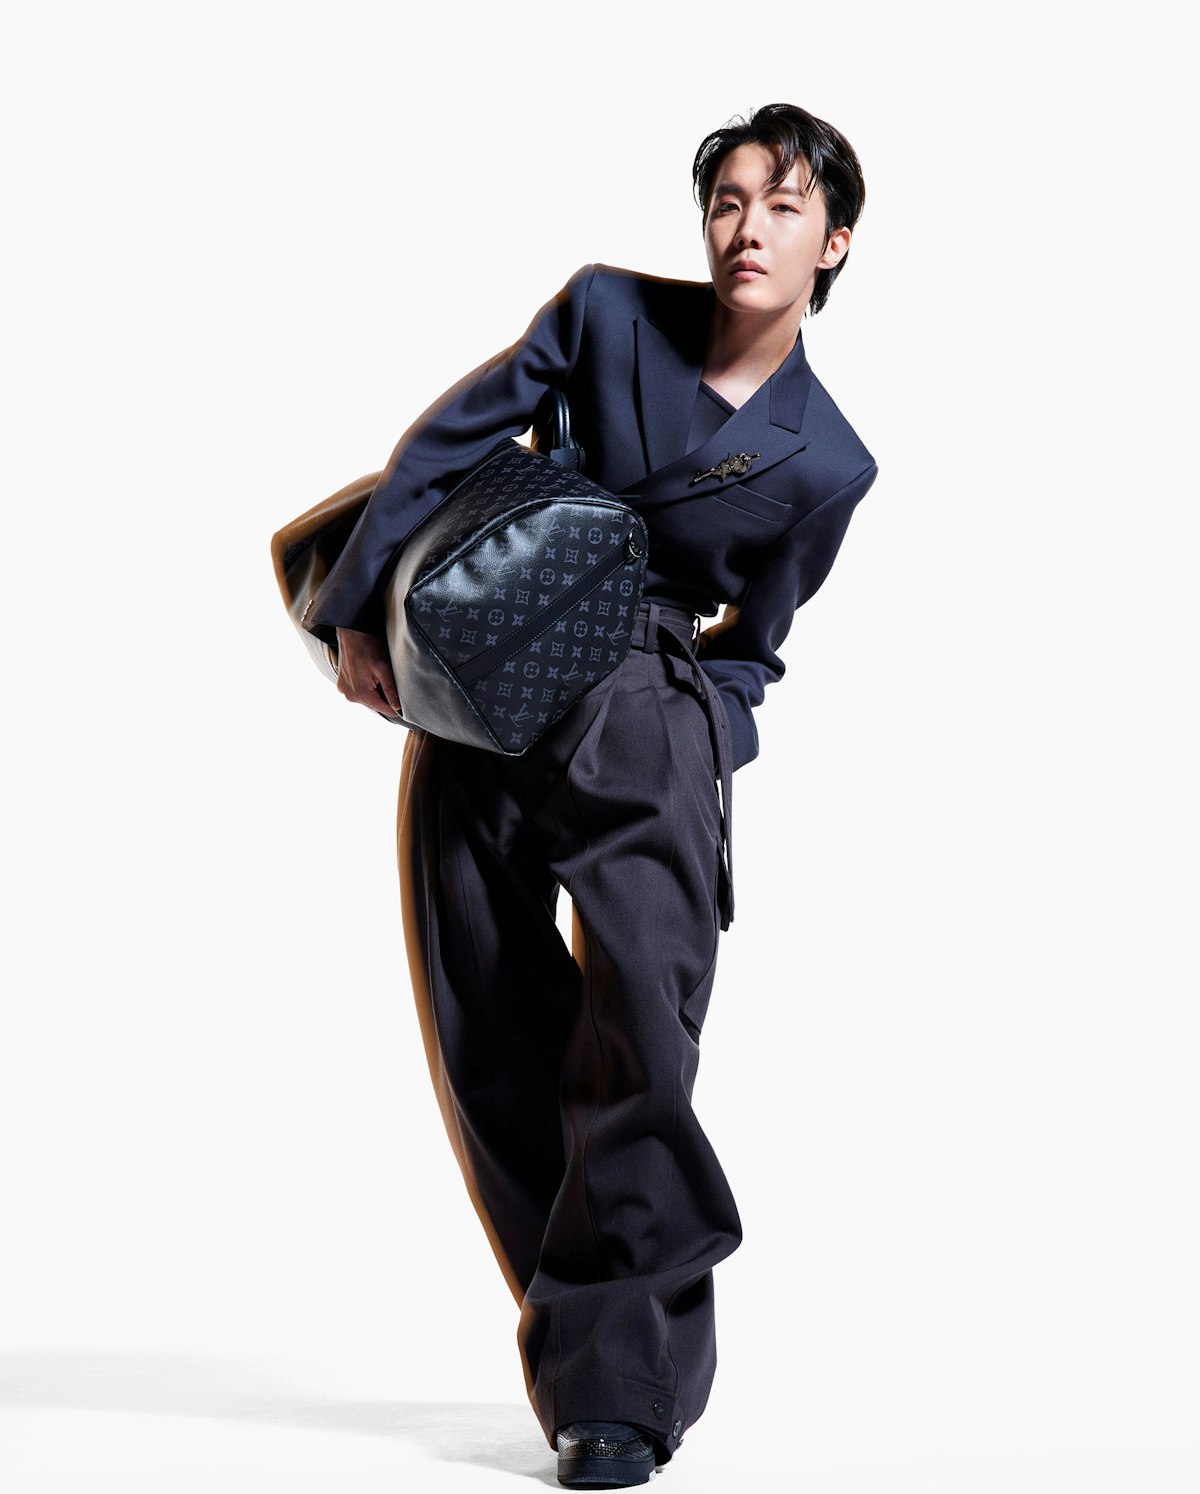 BTS' J-Hope Stars In His First Campaign For Louis Vuitton